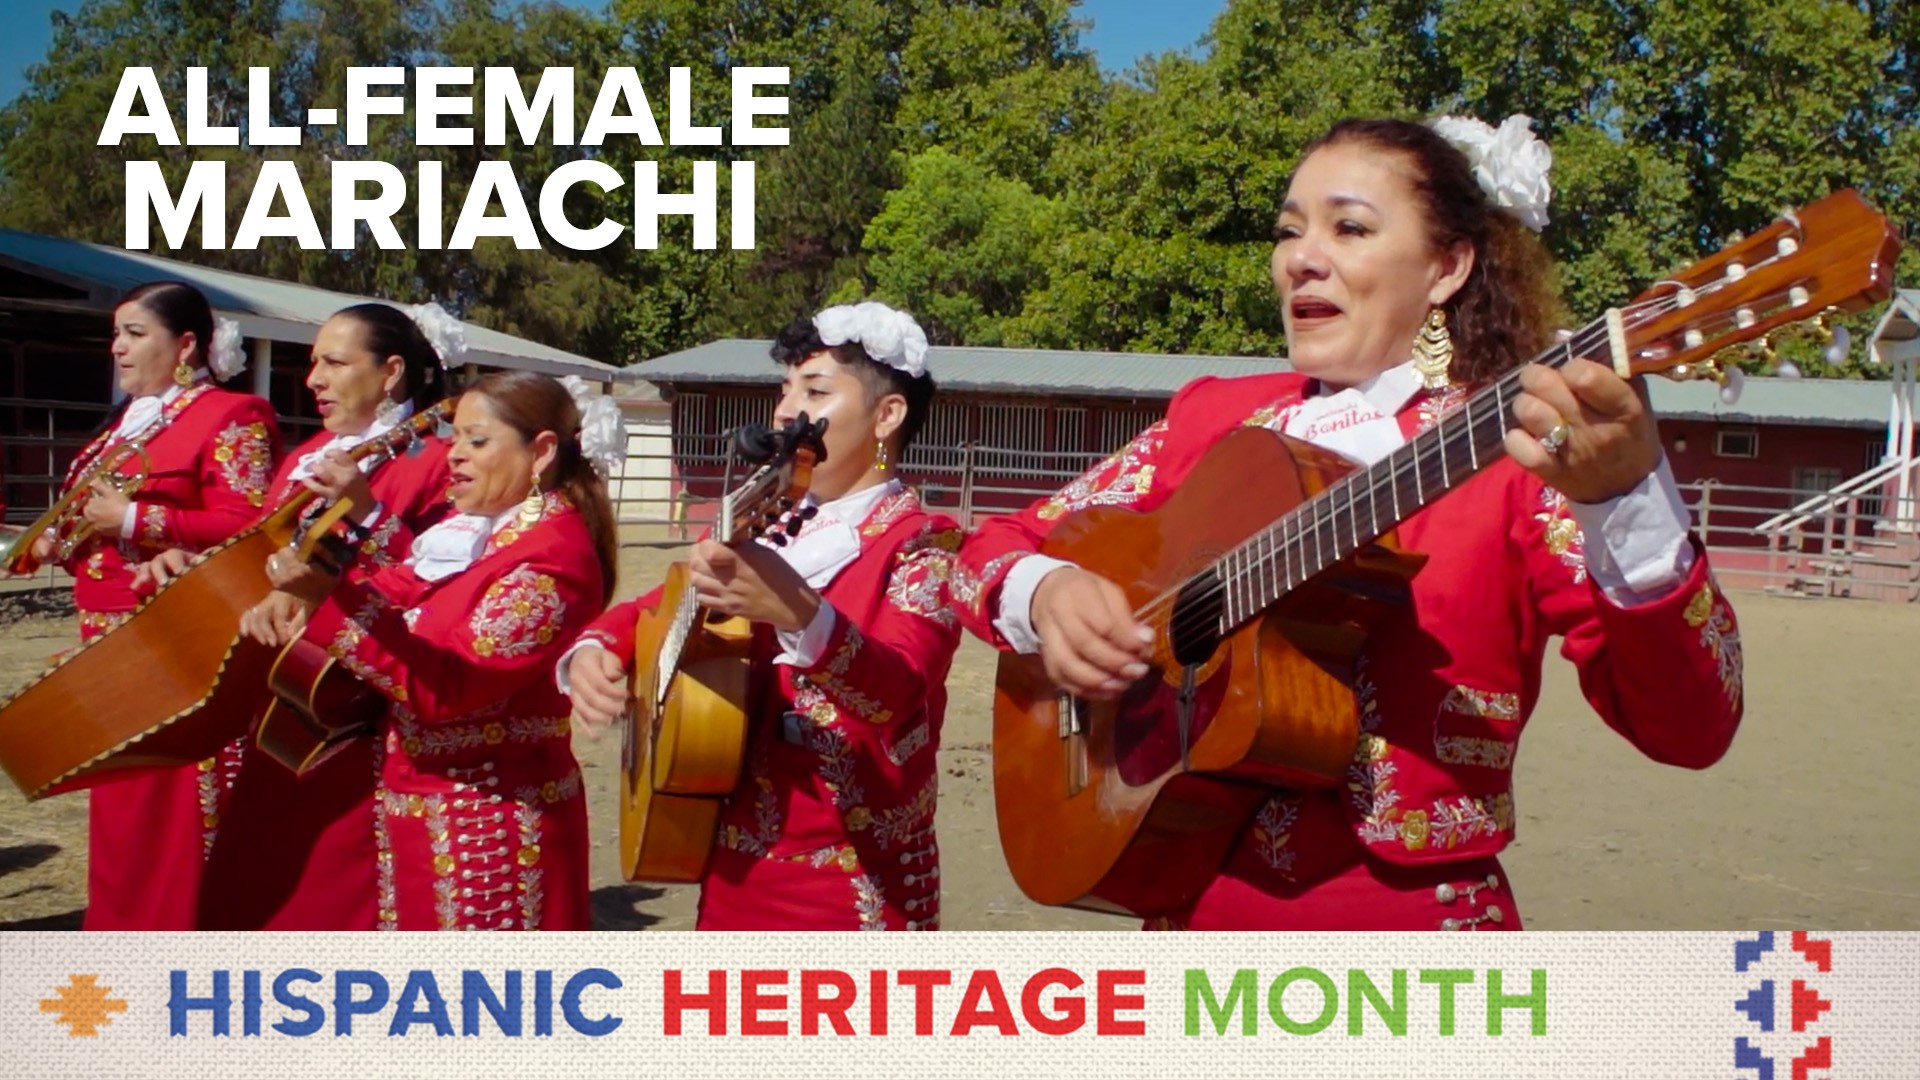 An all-female Mariachi group is making changes in a typically male-dominated music genre.